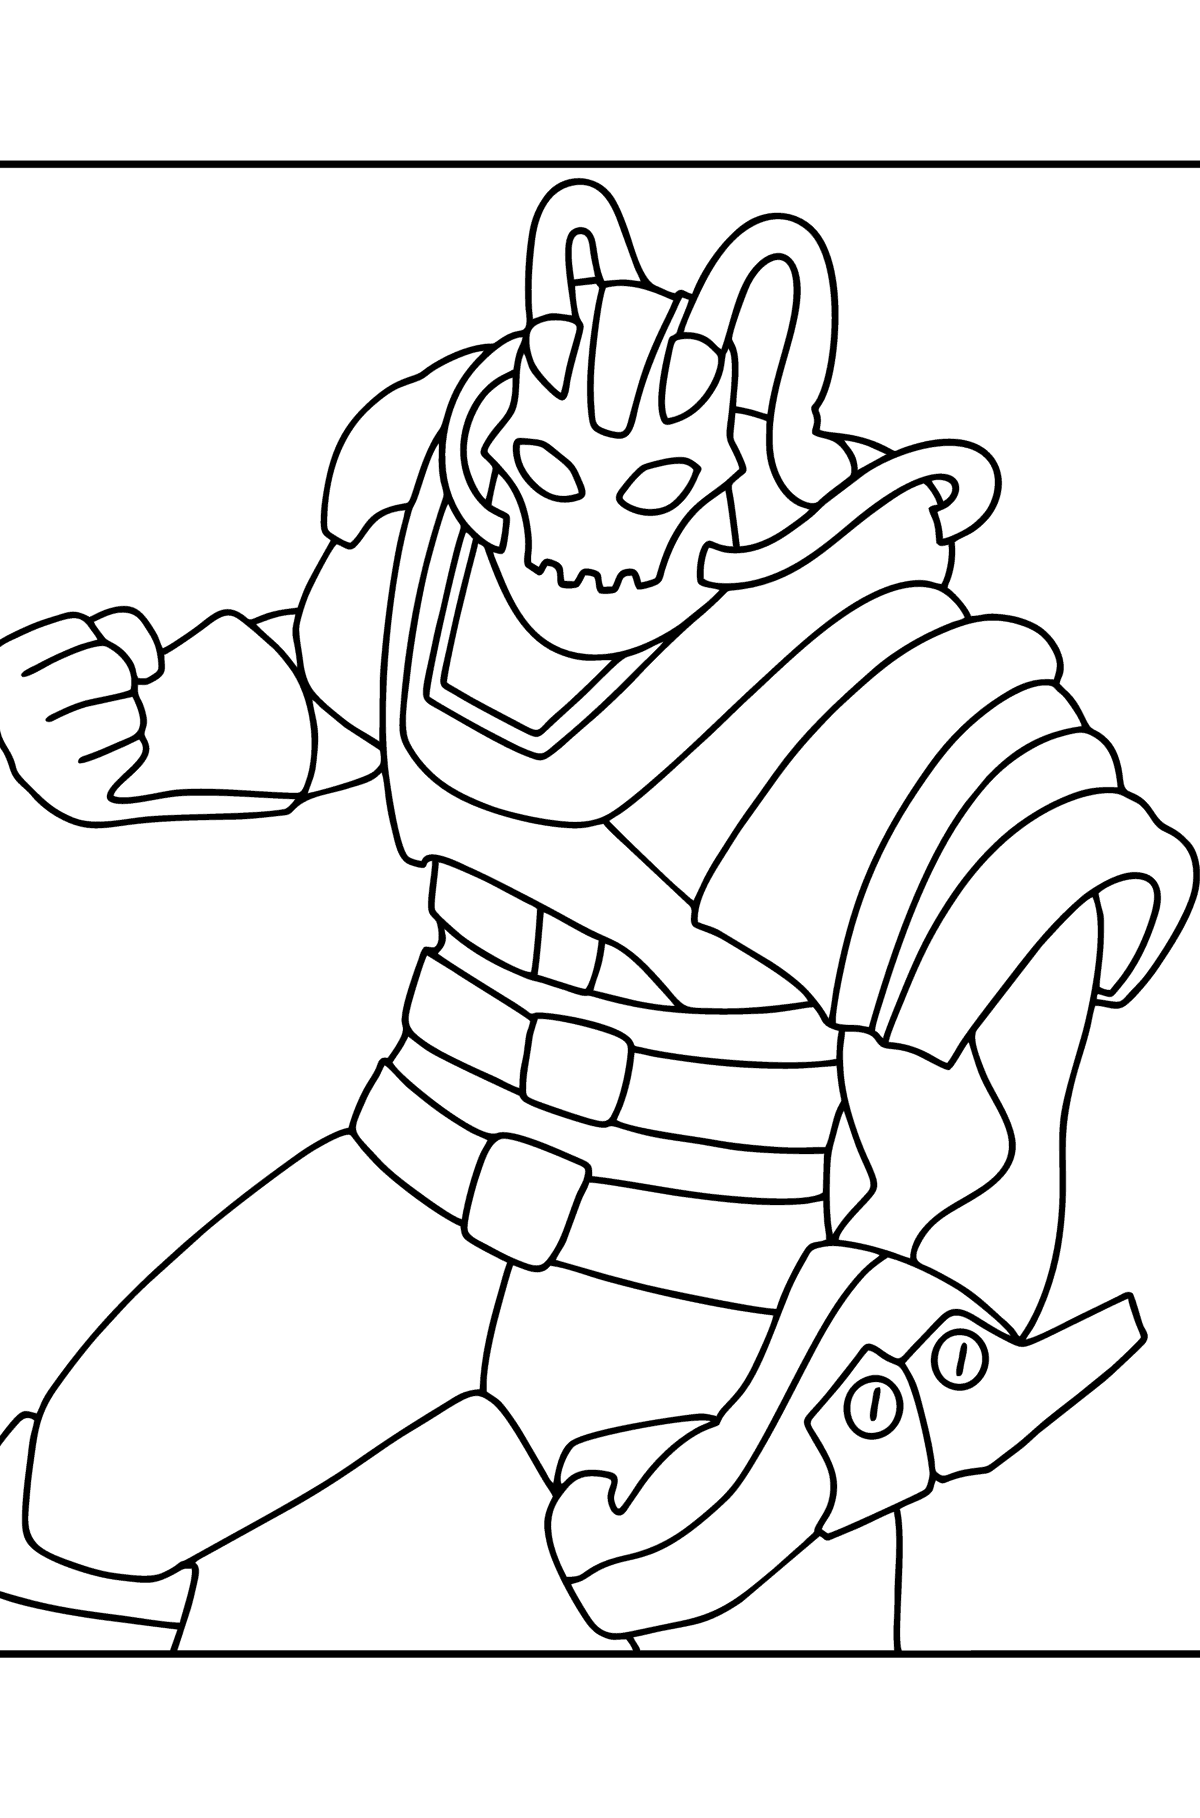 Fortnite Kit coloring page - Coloring Pages for Kids